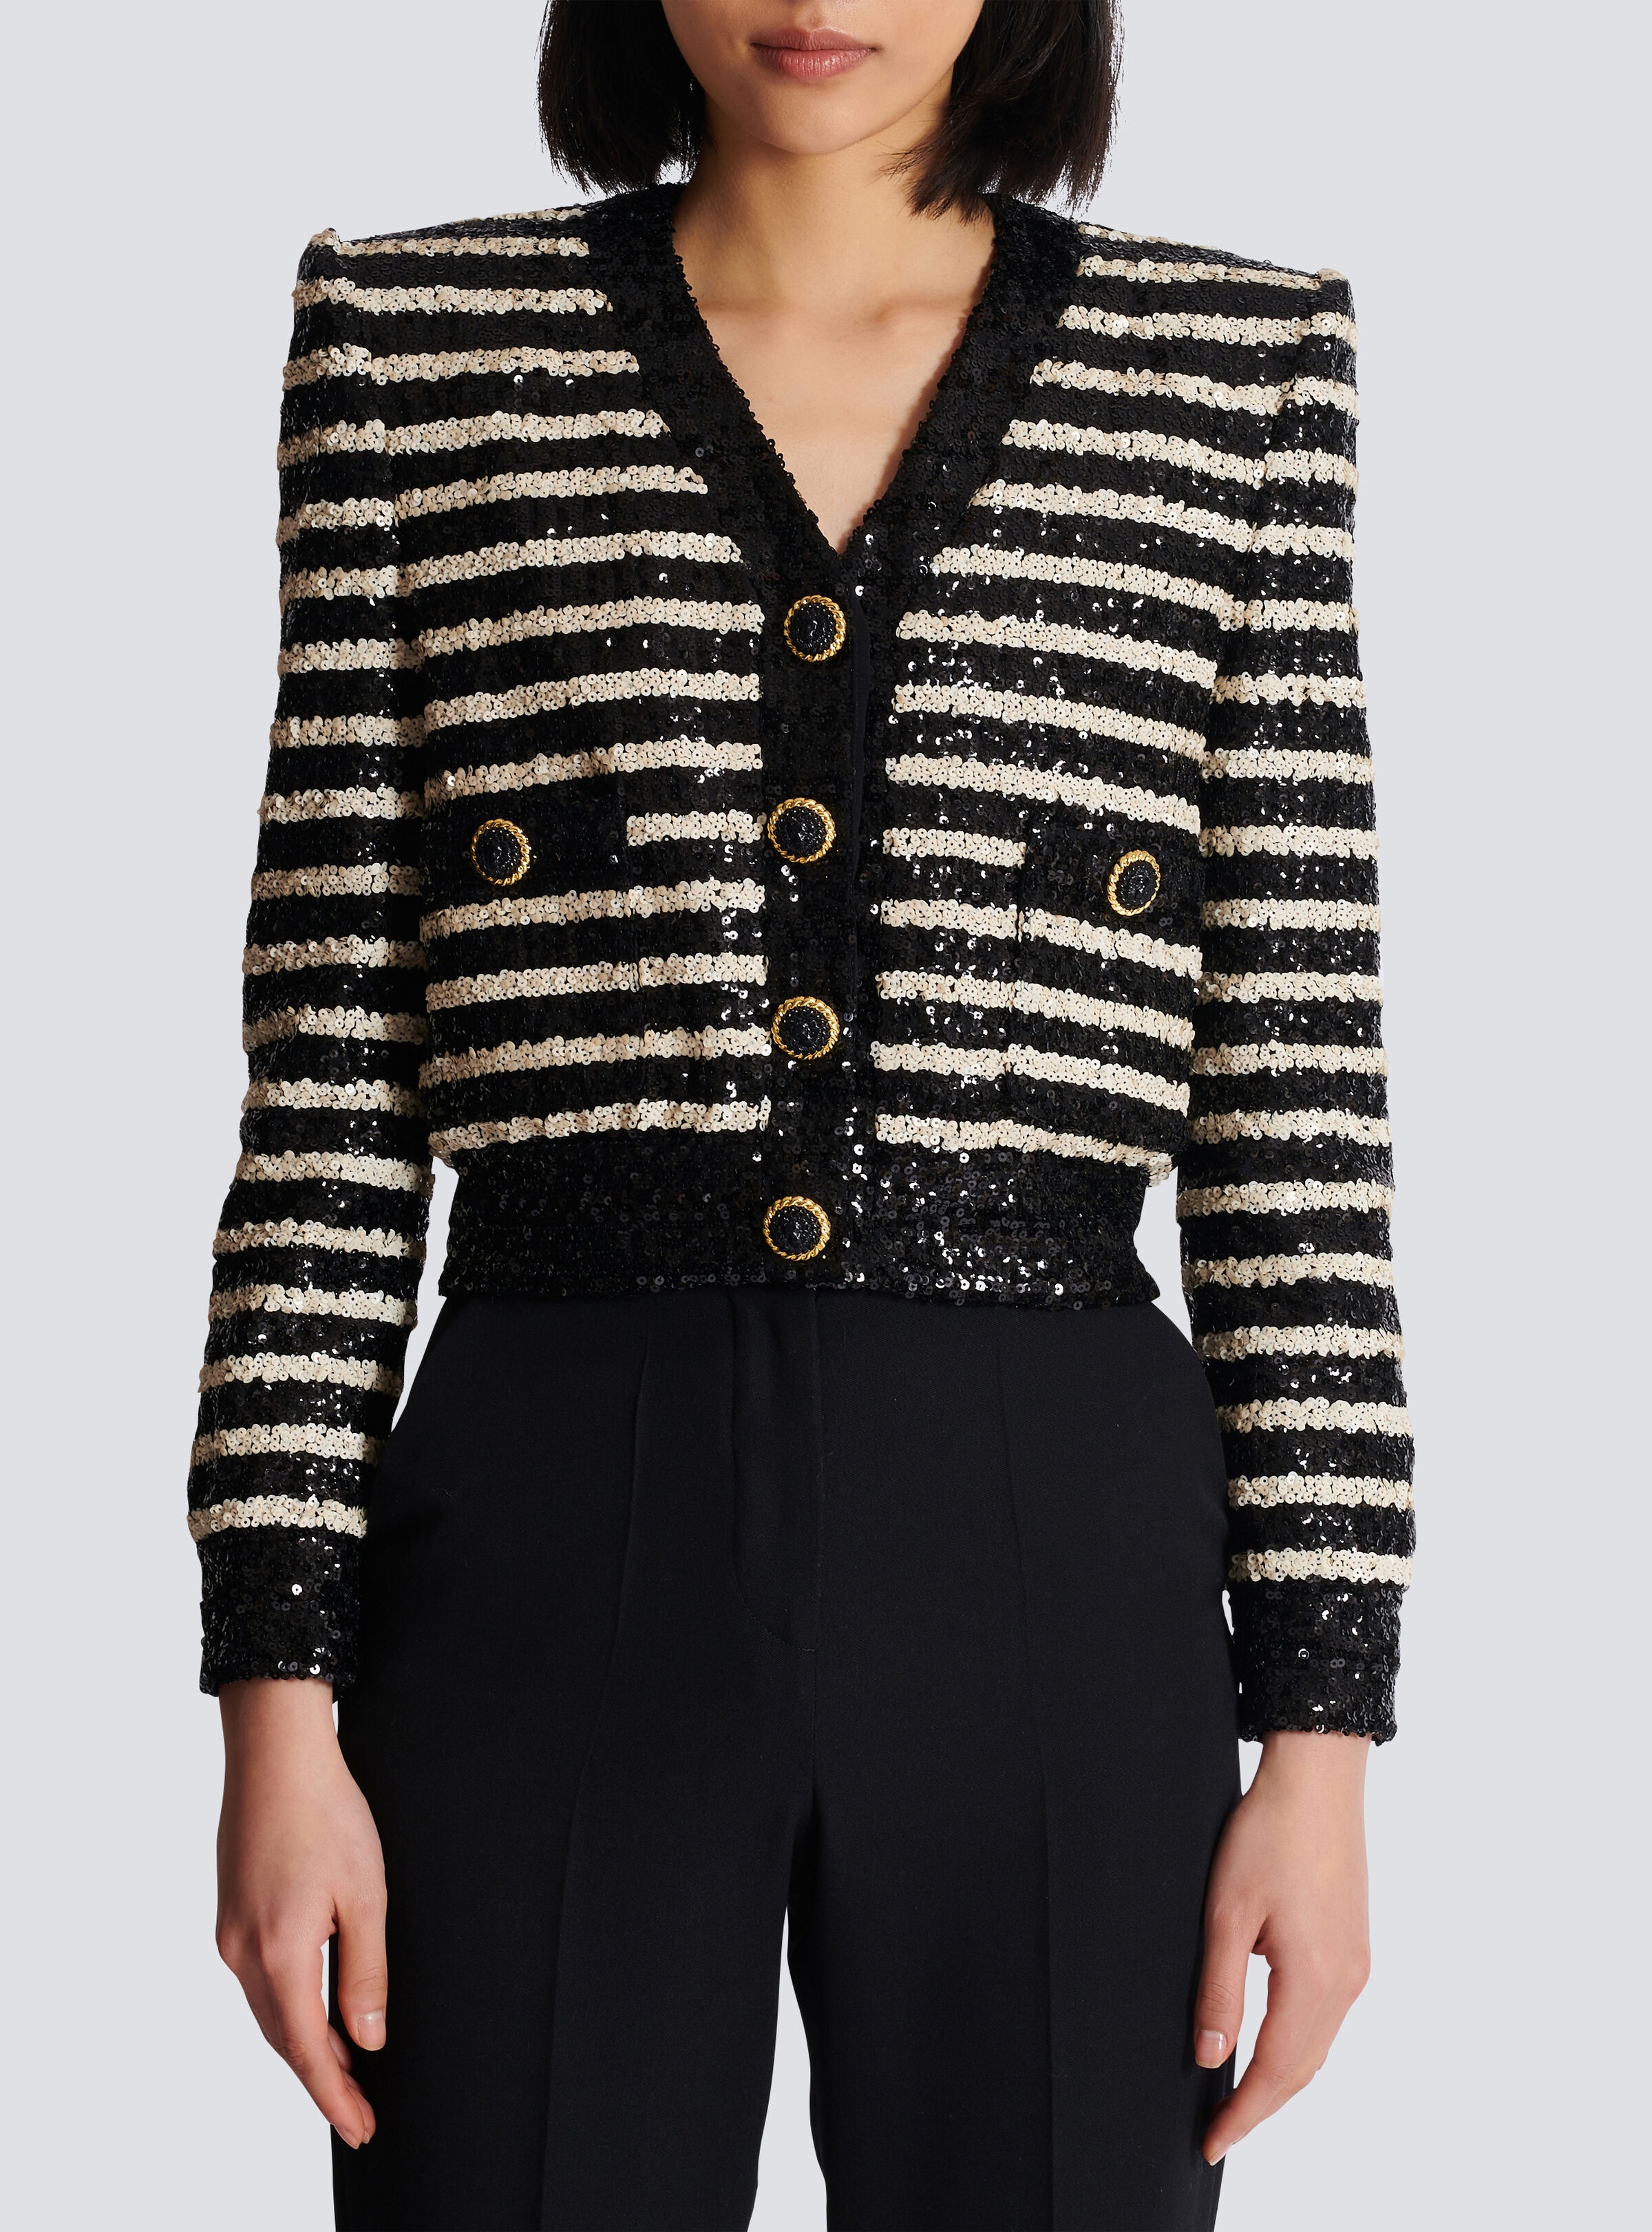 Short striped sequin jacket with 2 pockets - 5